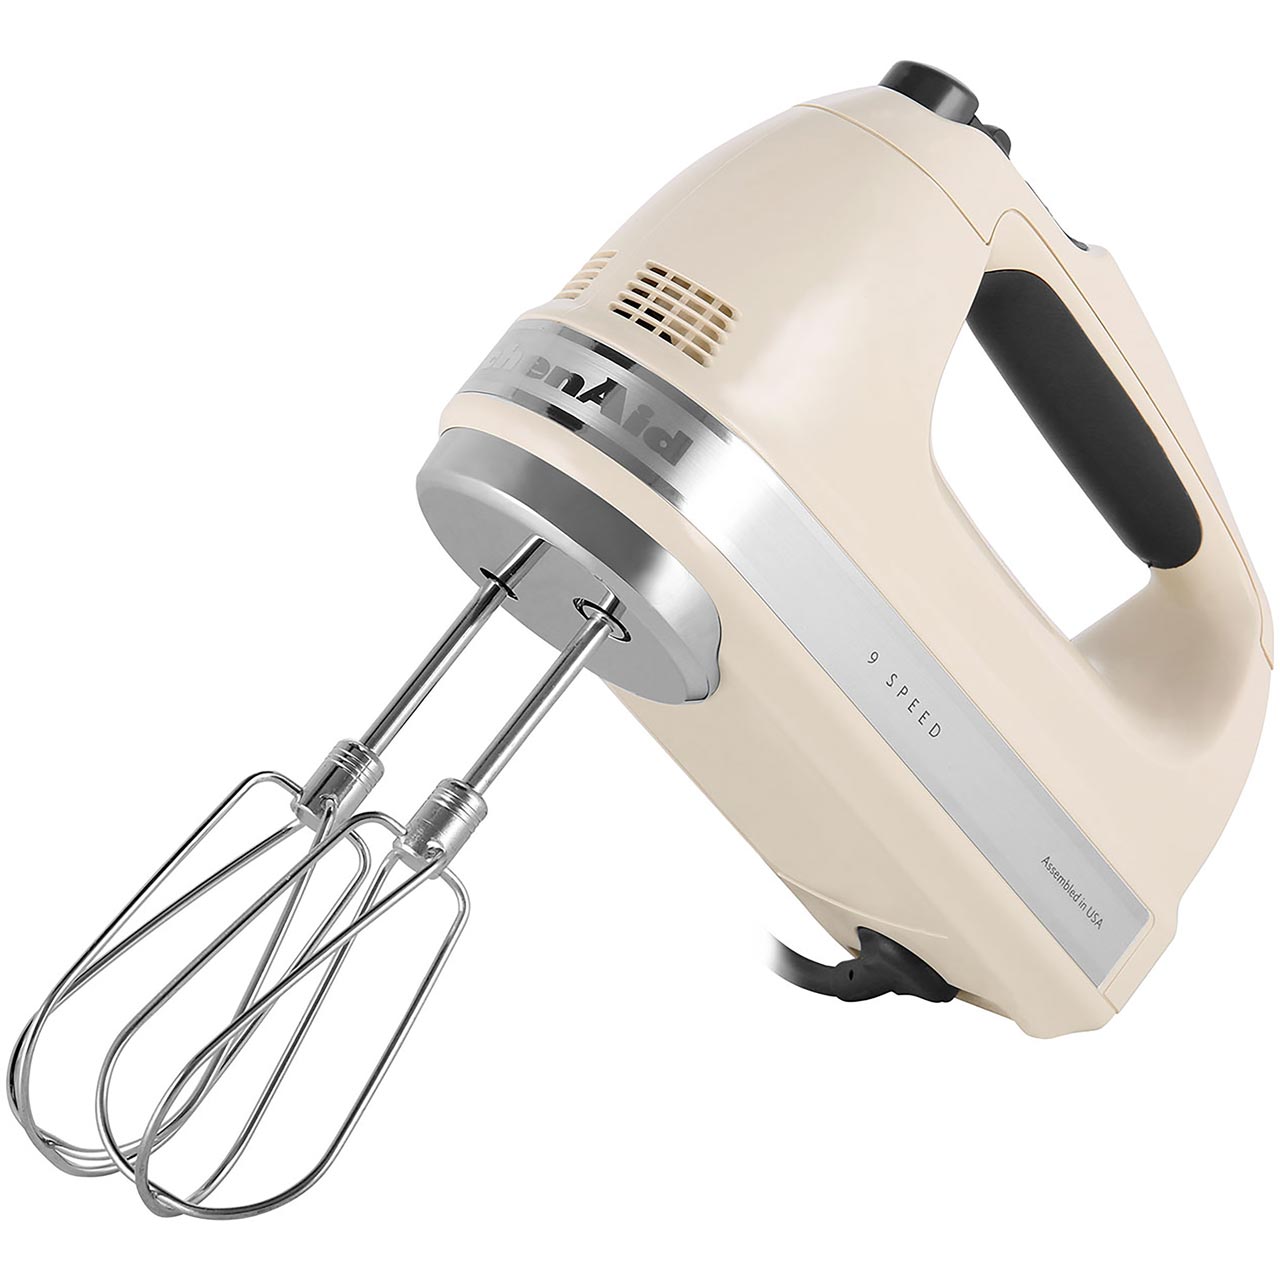 KitchenAid 5KHM9212BAC Hand Mixer with 3 Accessories Review